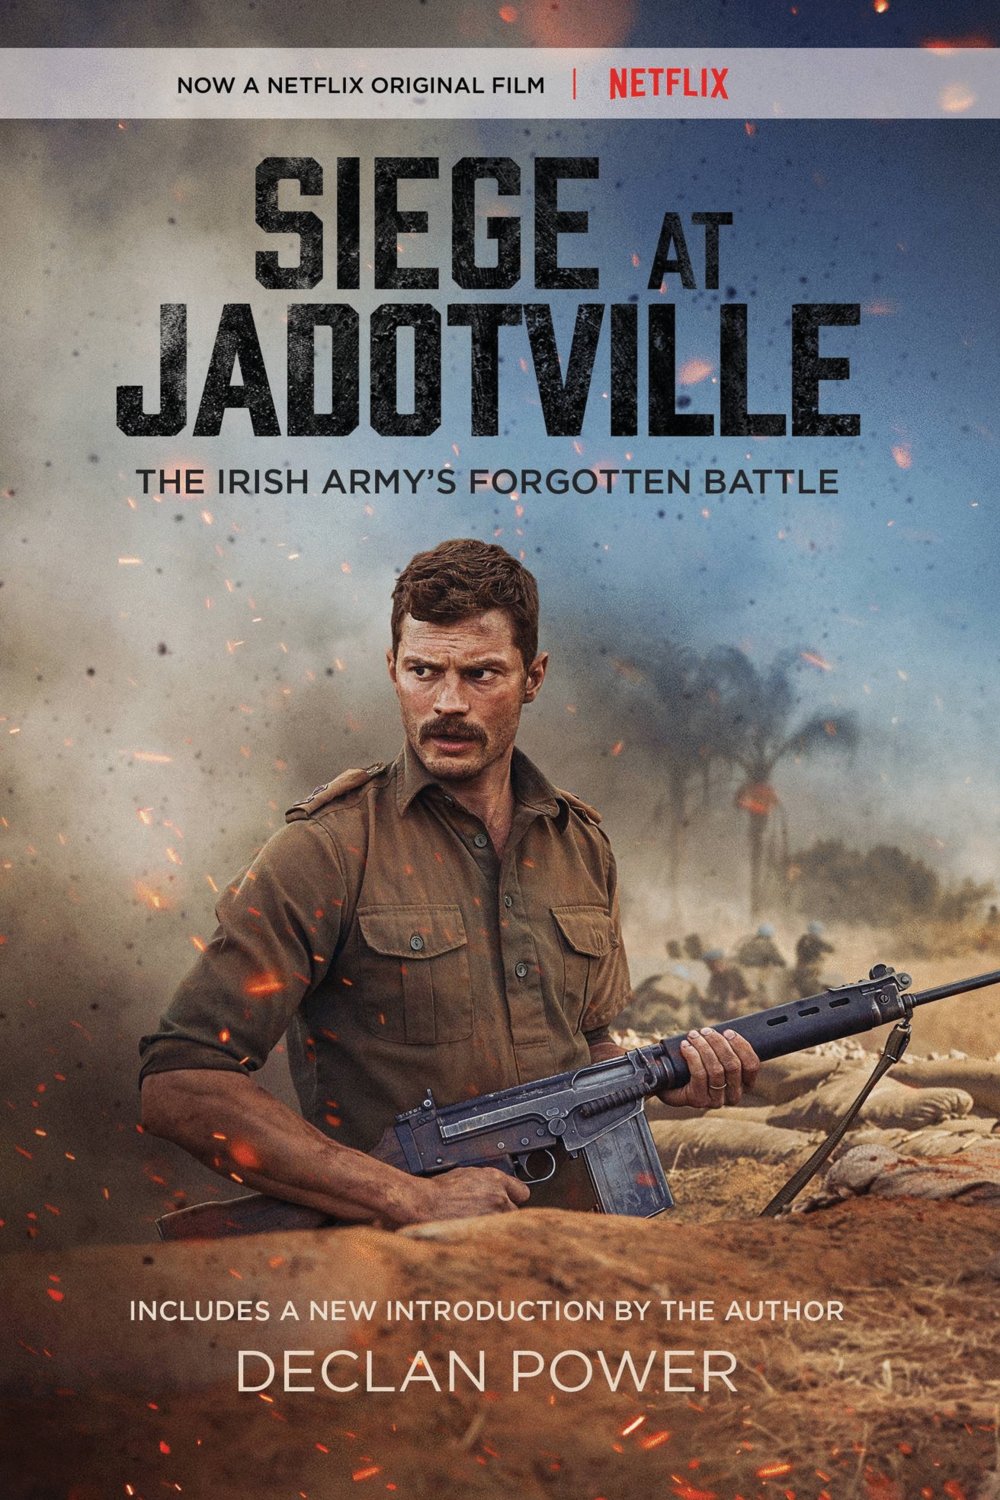 Poster of the movie The Siege of Jadotville